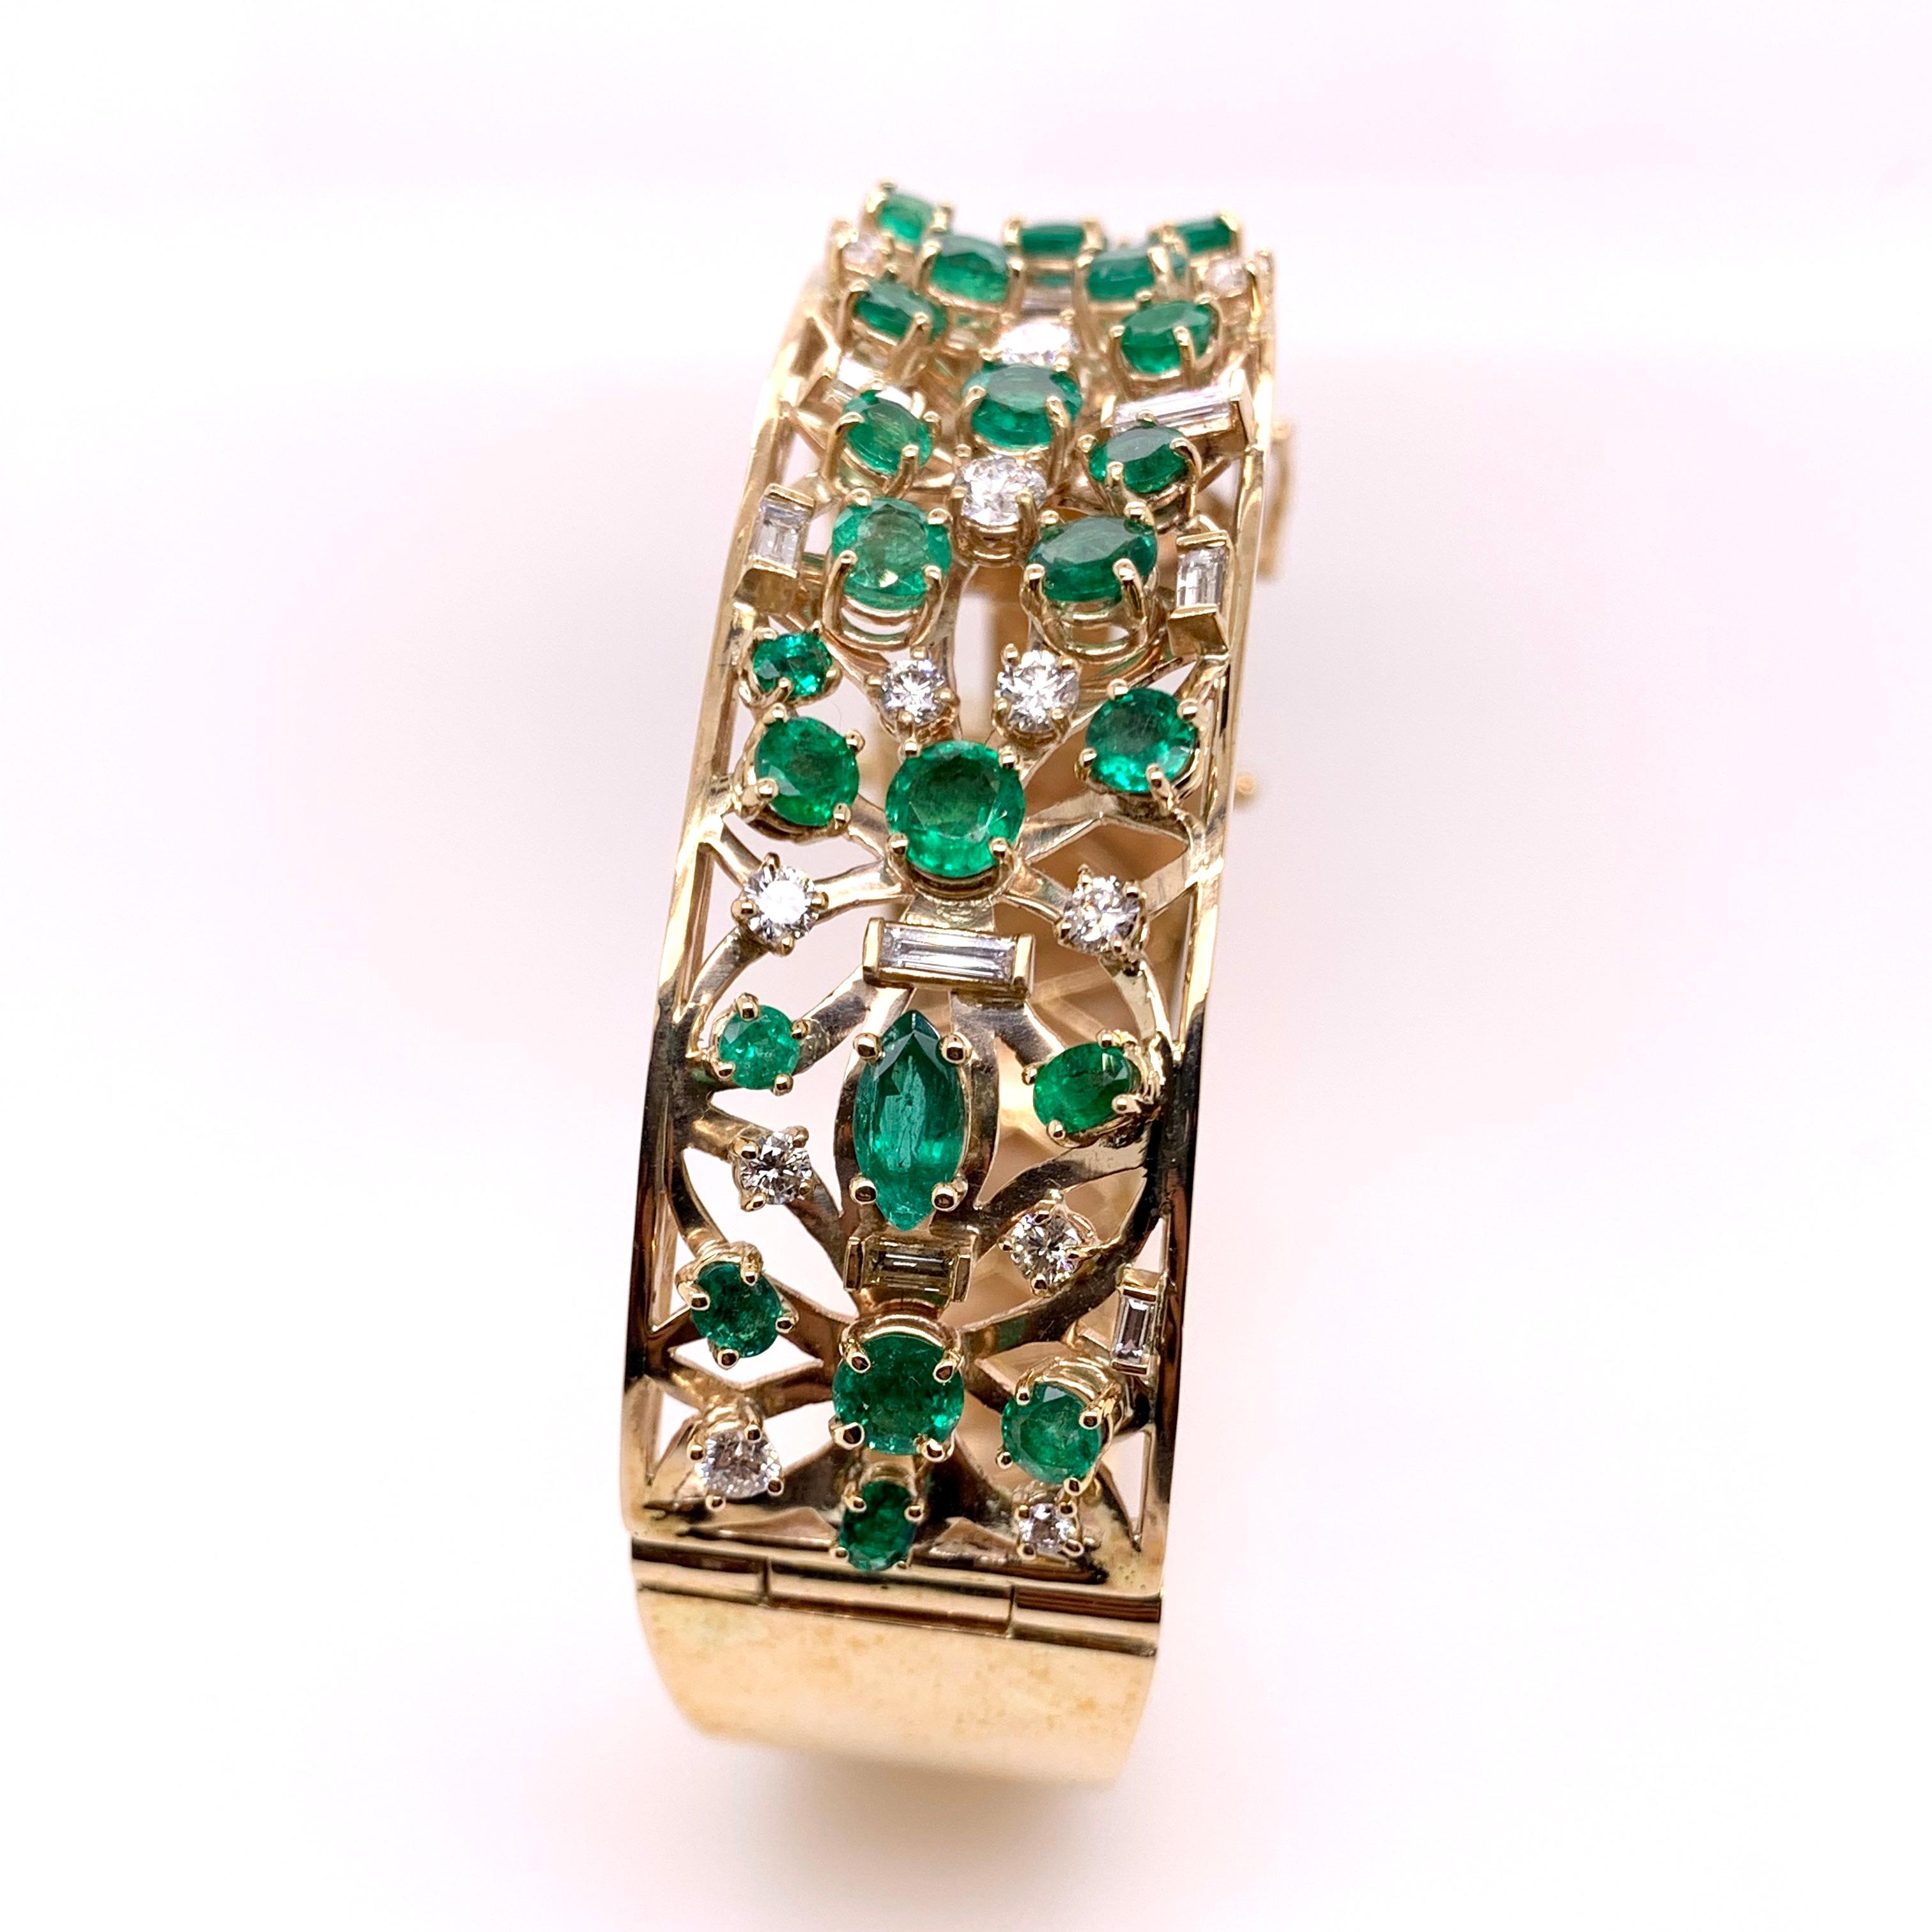 This gorgeous asymmetrical emerald and diamond cuff bangle will attract a lot of attention and people will be green with envy over your emeralds!  This unique handmade mosaic is an art piece for your wrist with the array of round cut emeralds and